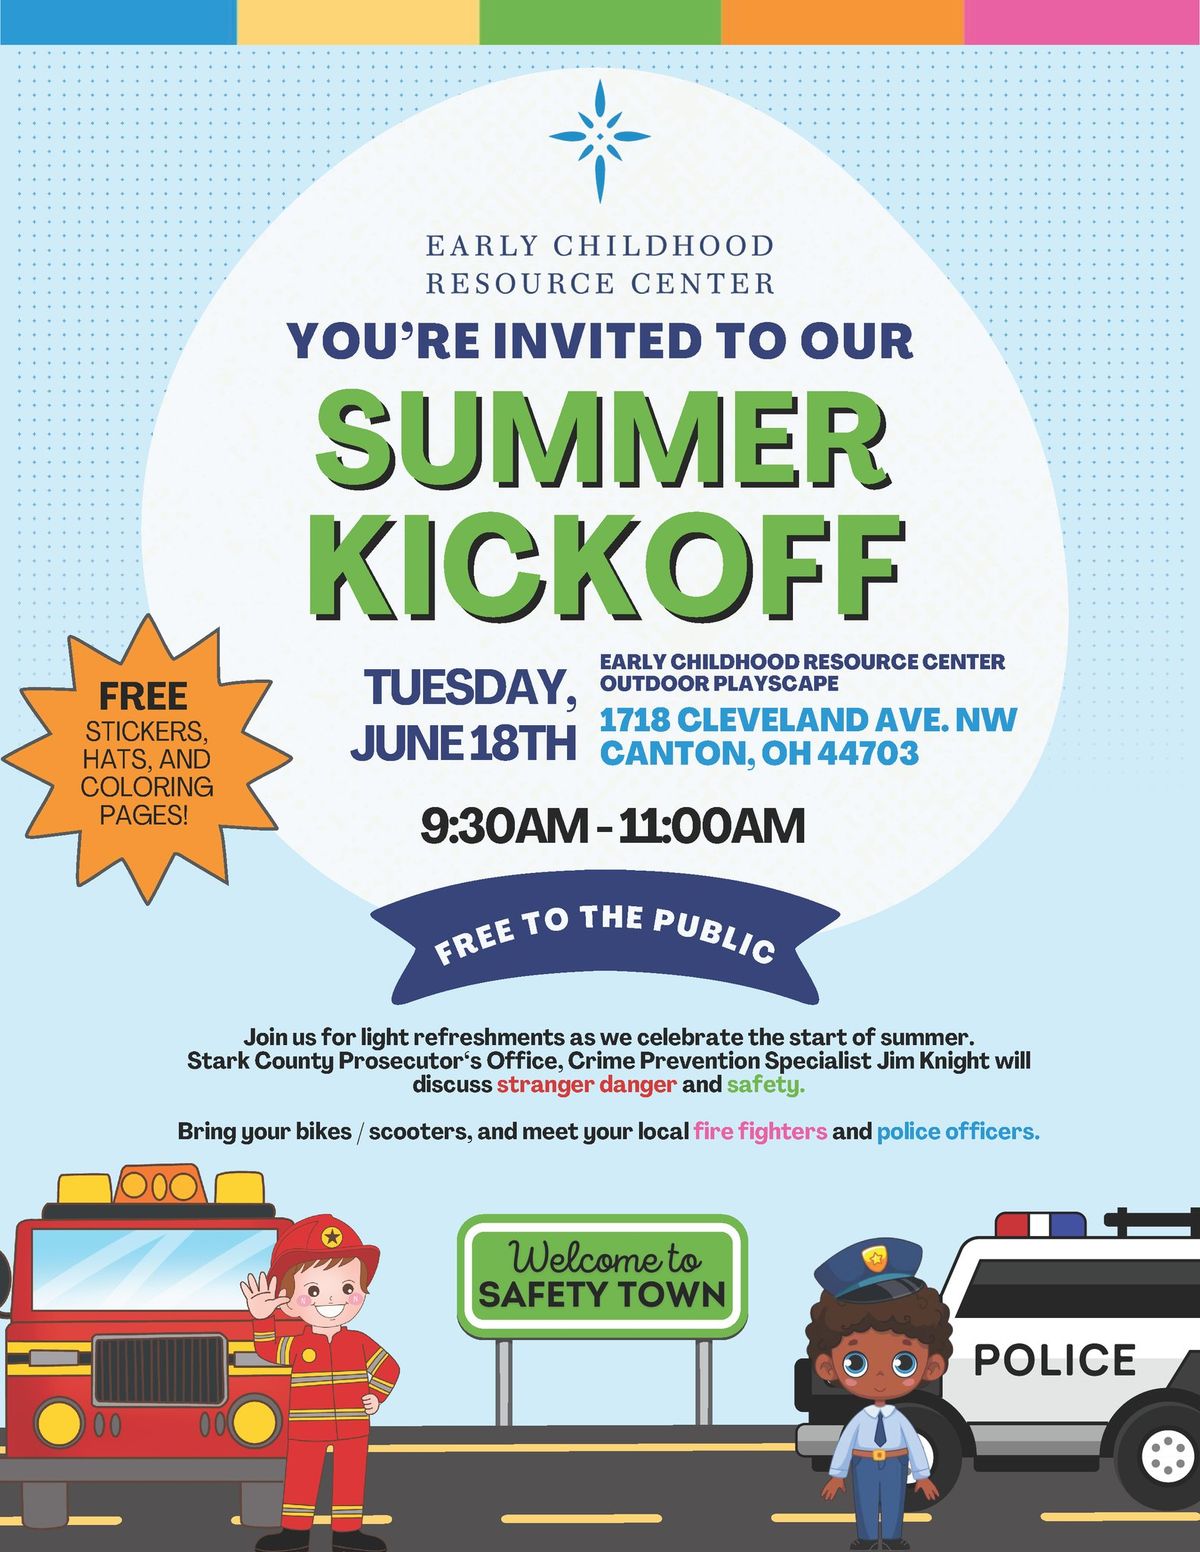 Summer Kickoff at the Early Childhood Resource Center